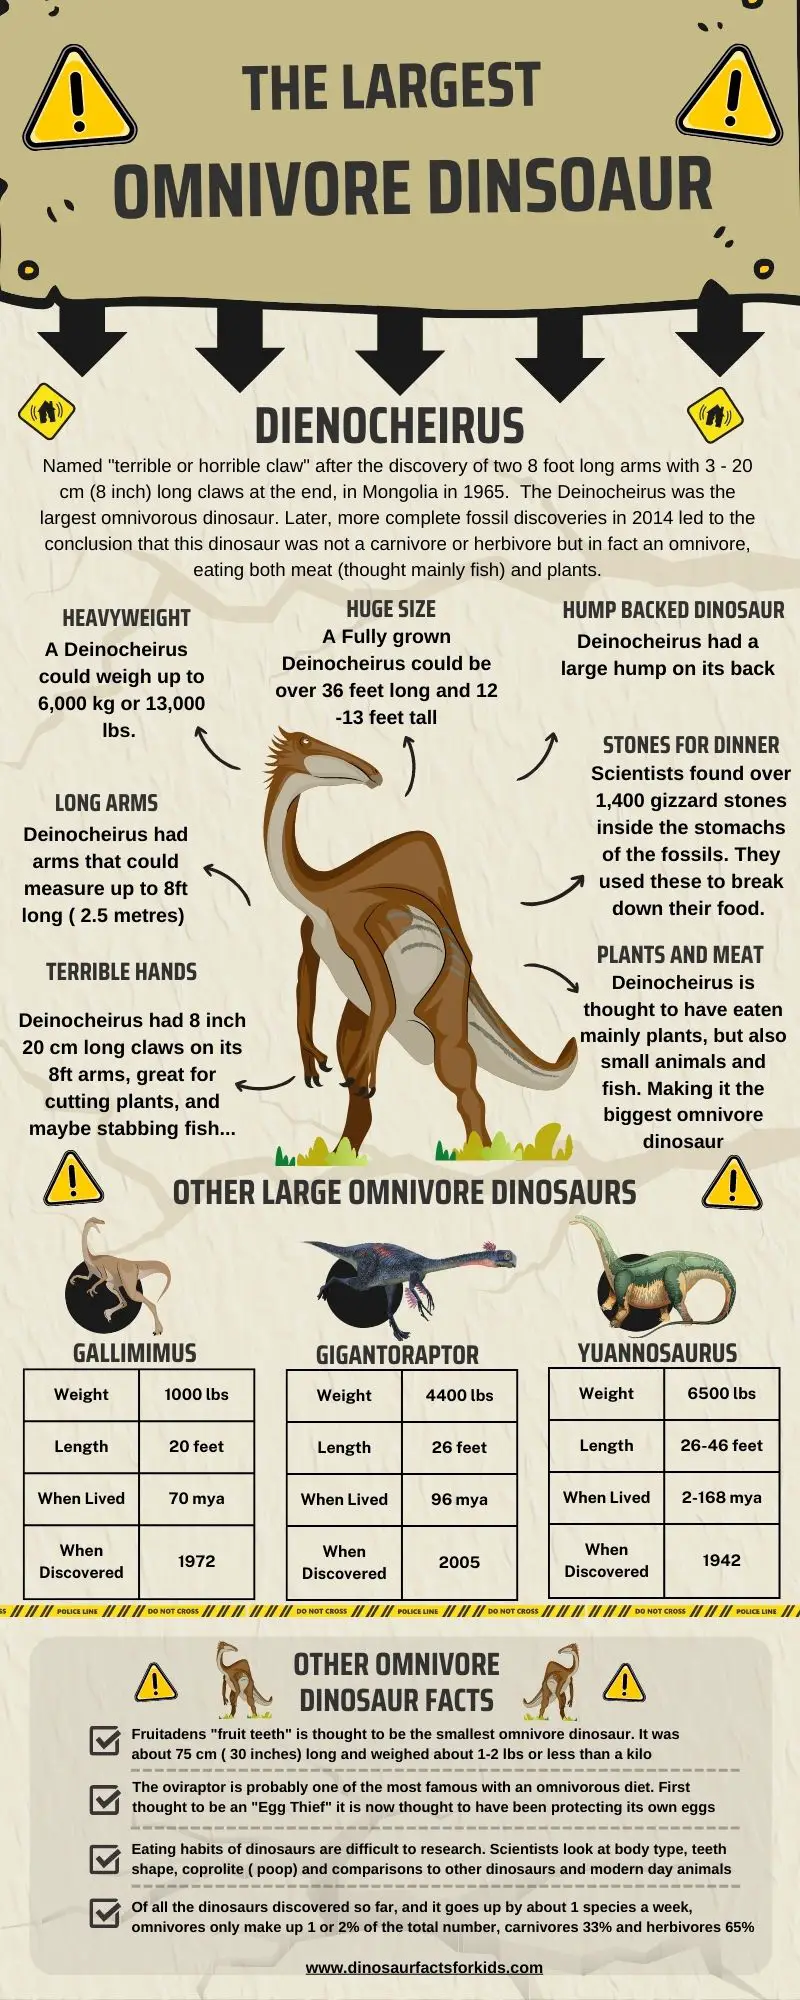 What Did Omnivorous Dinosaurs Eat? - Dinosaur Facts For Kids